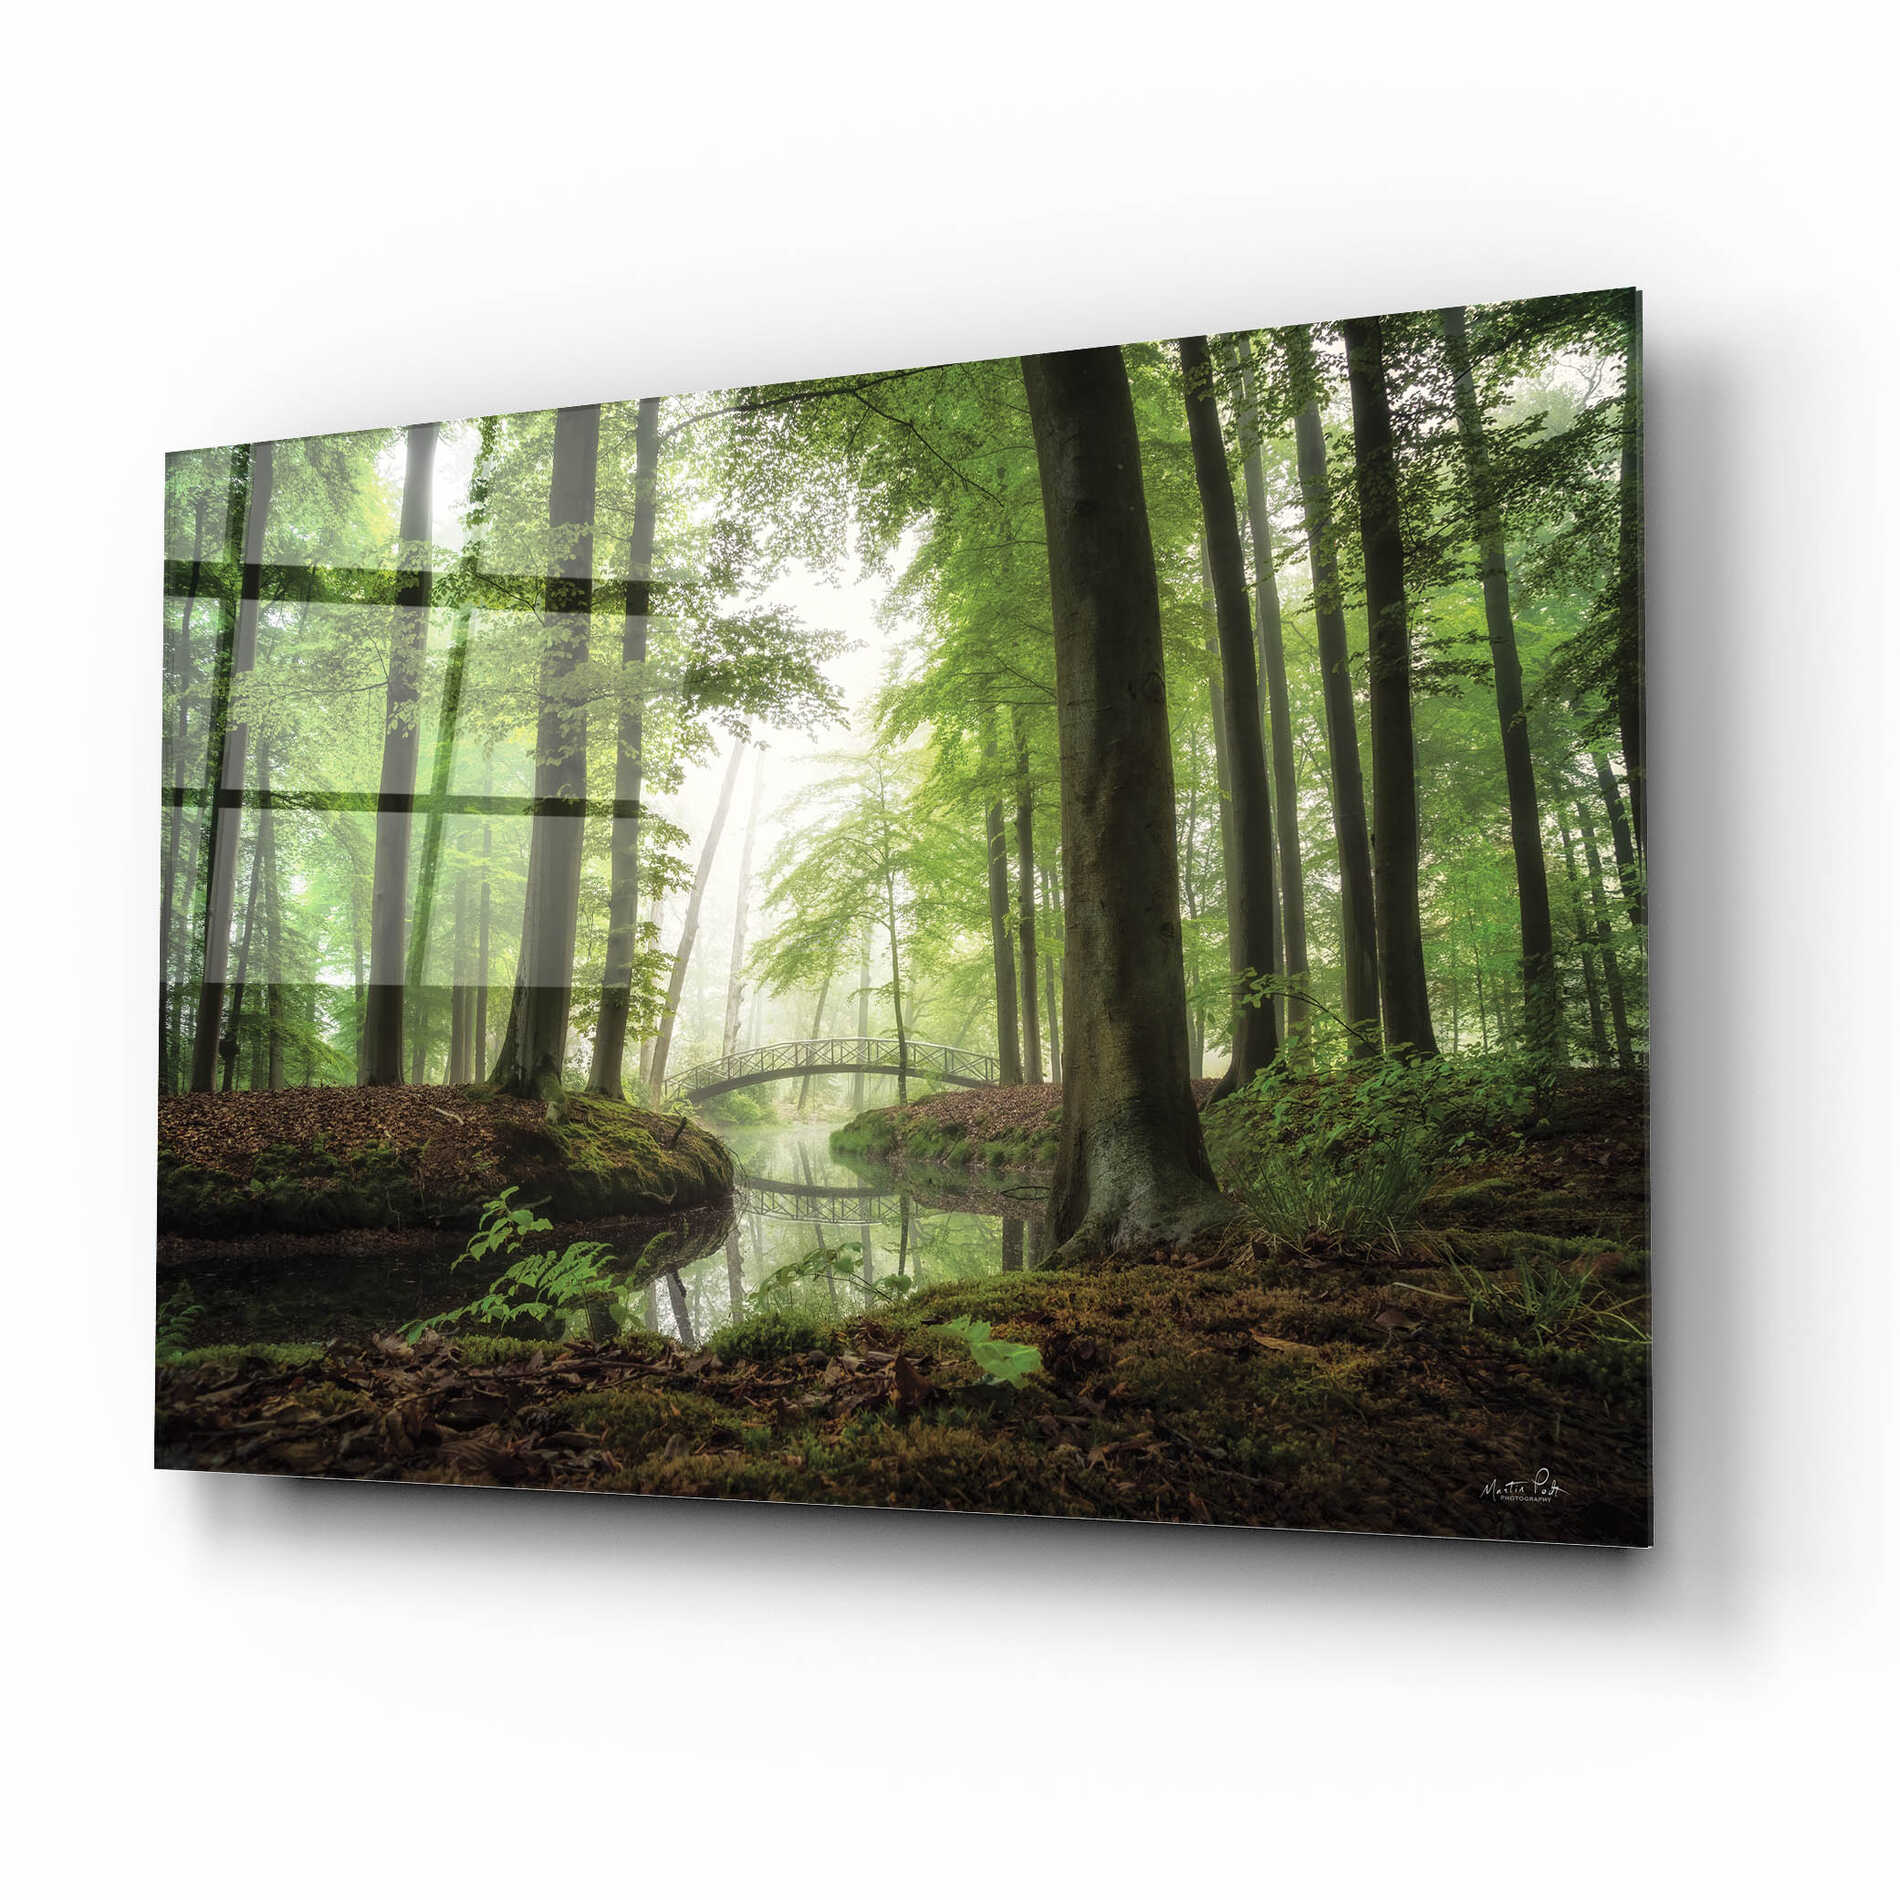 Epic Art 'On a Beautiful Morning' by Martin Podt, Acrylic Glass Wall Art,16x12